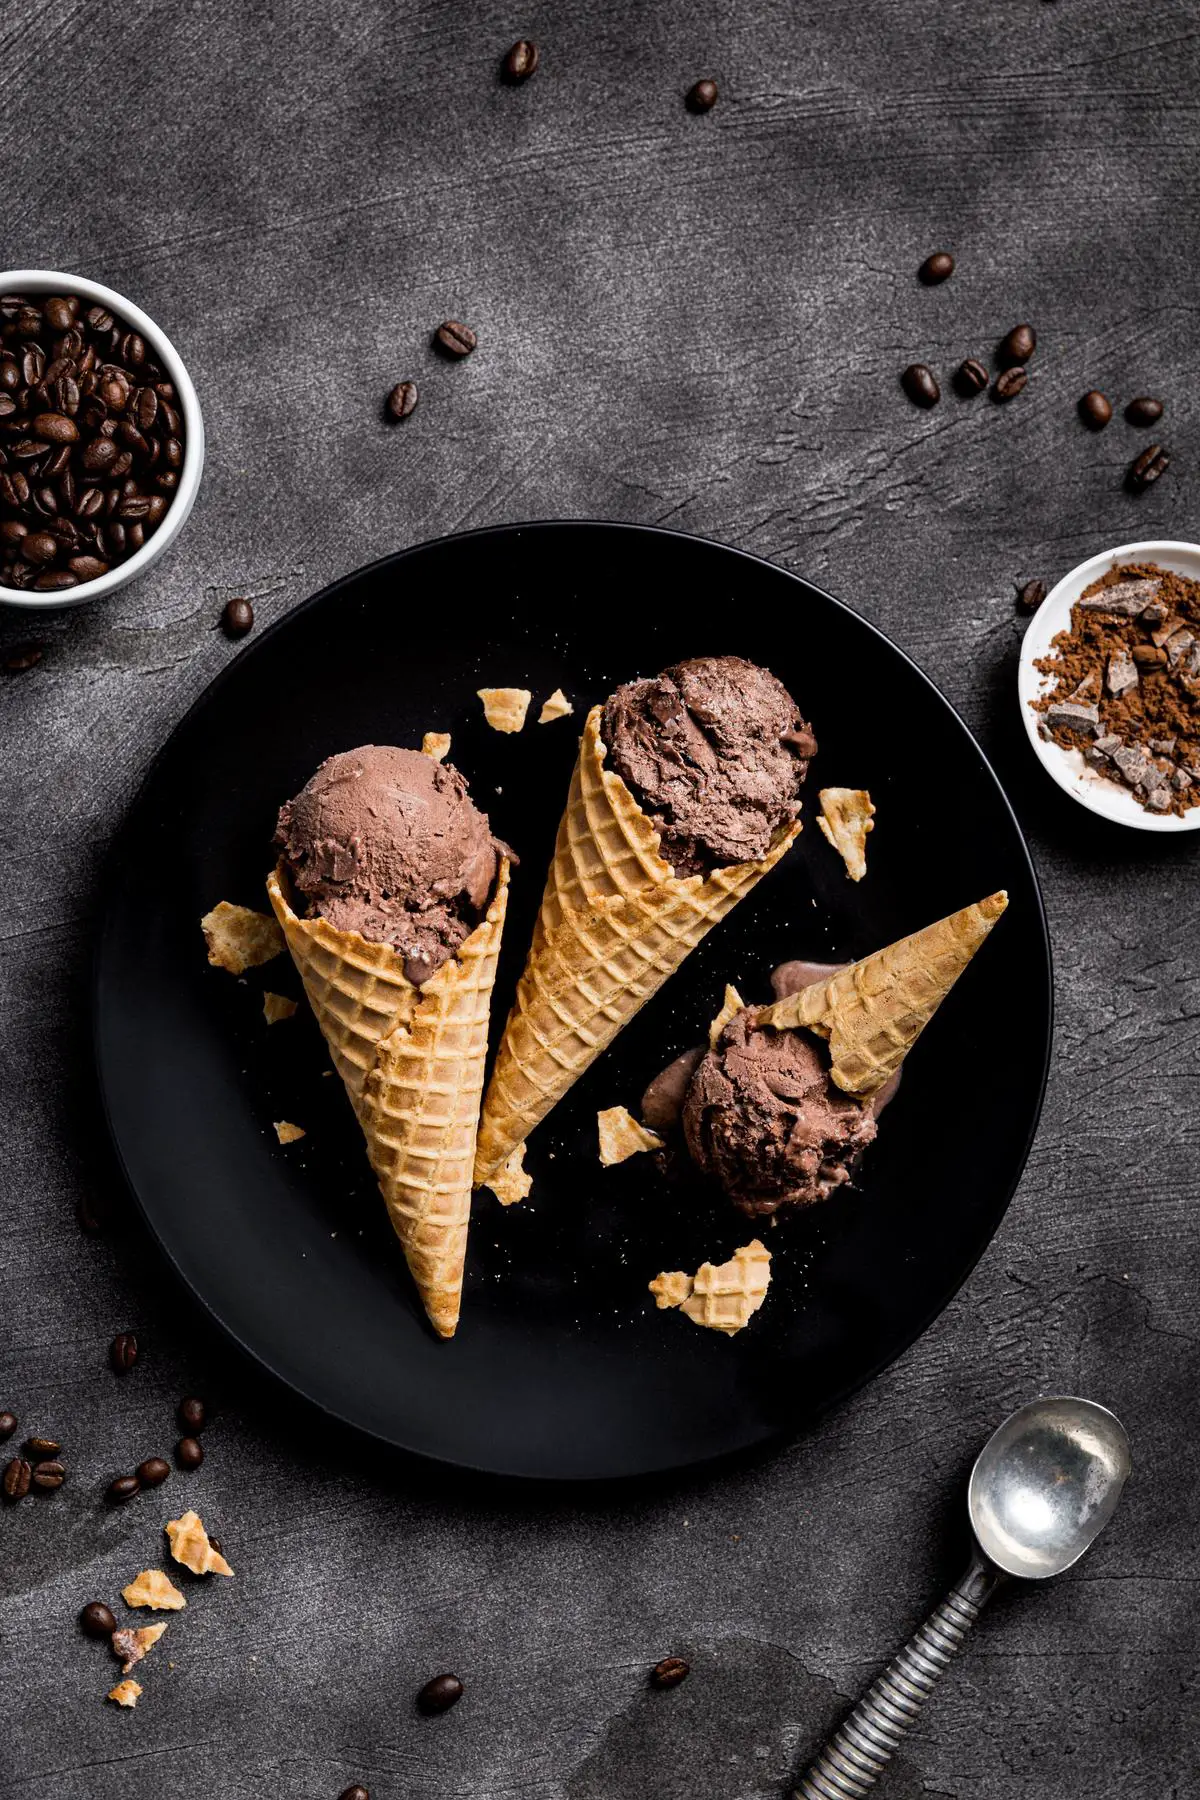 A close-up image of a delicious Drumstick ice cream cone with chocolate, nuts, and a crunchy sugar cone.